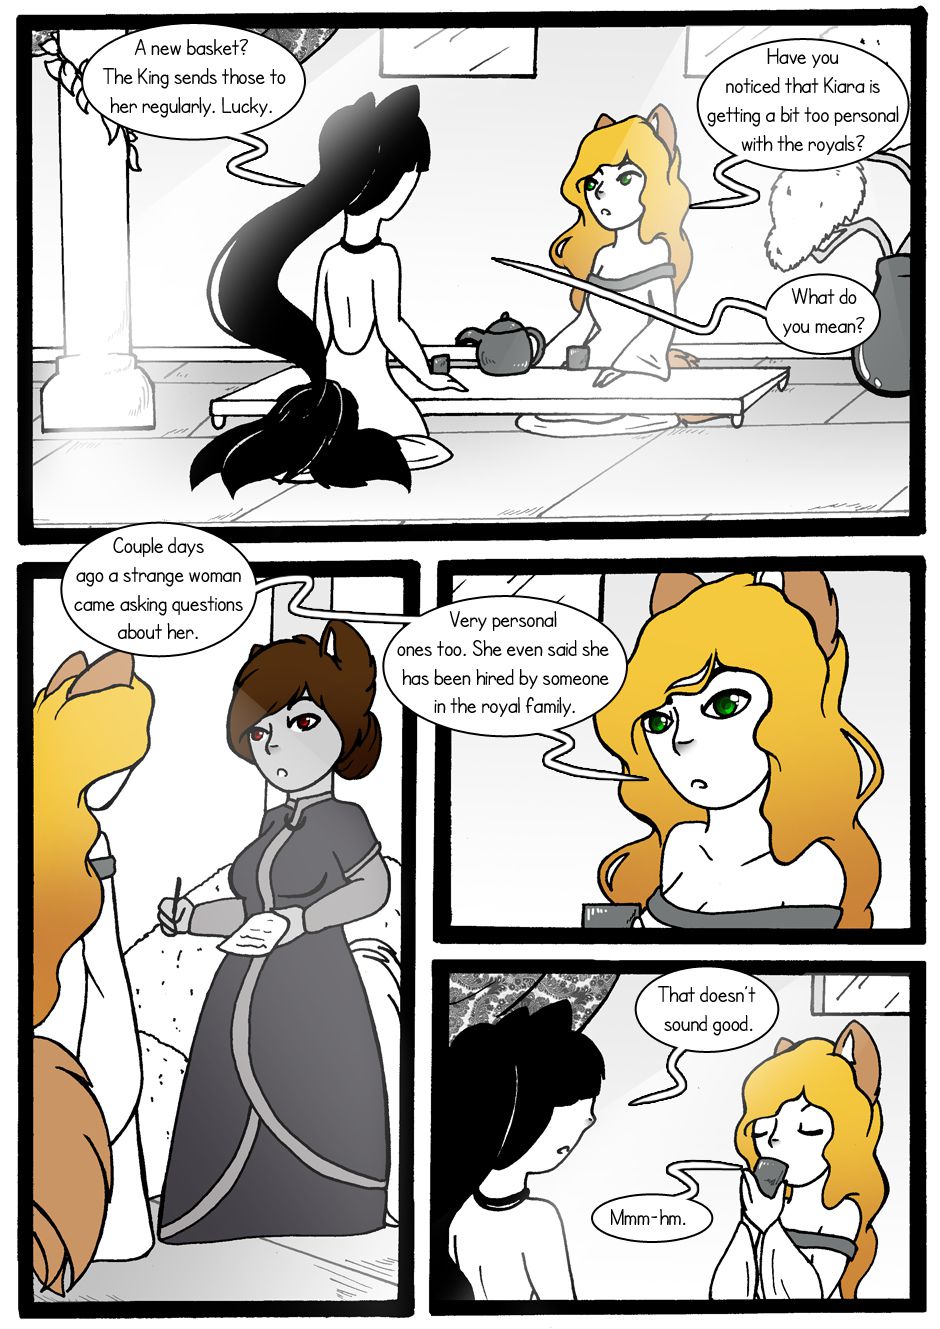 [Jeny-jen94] Between Kings and Queens [Ongoing] 112